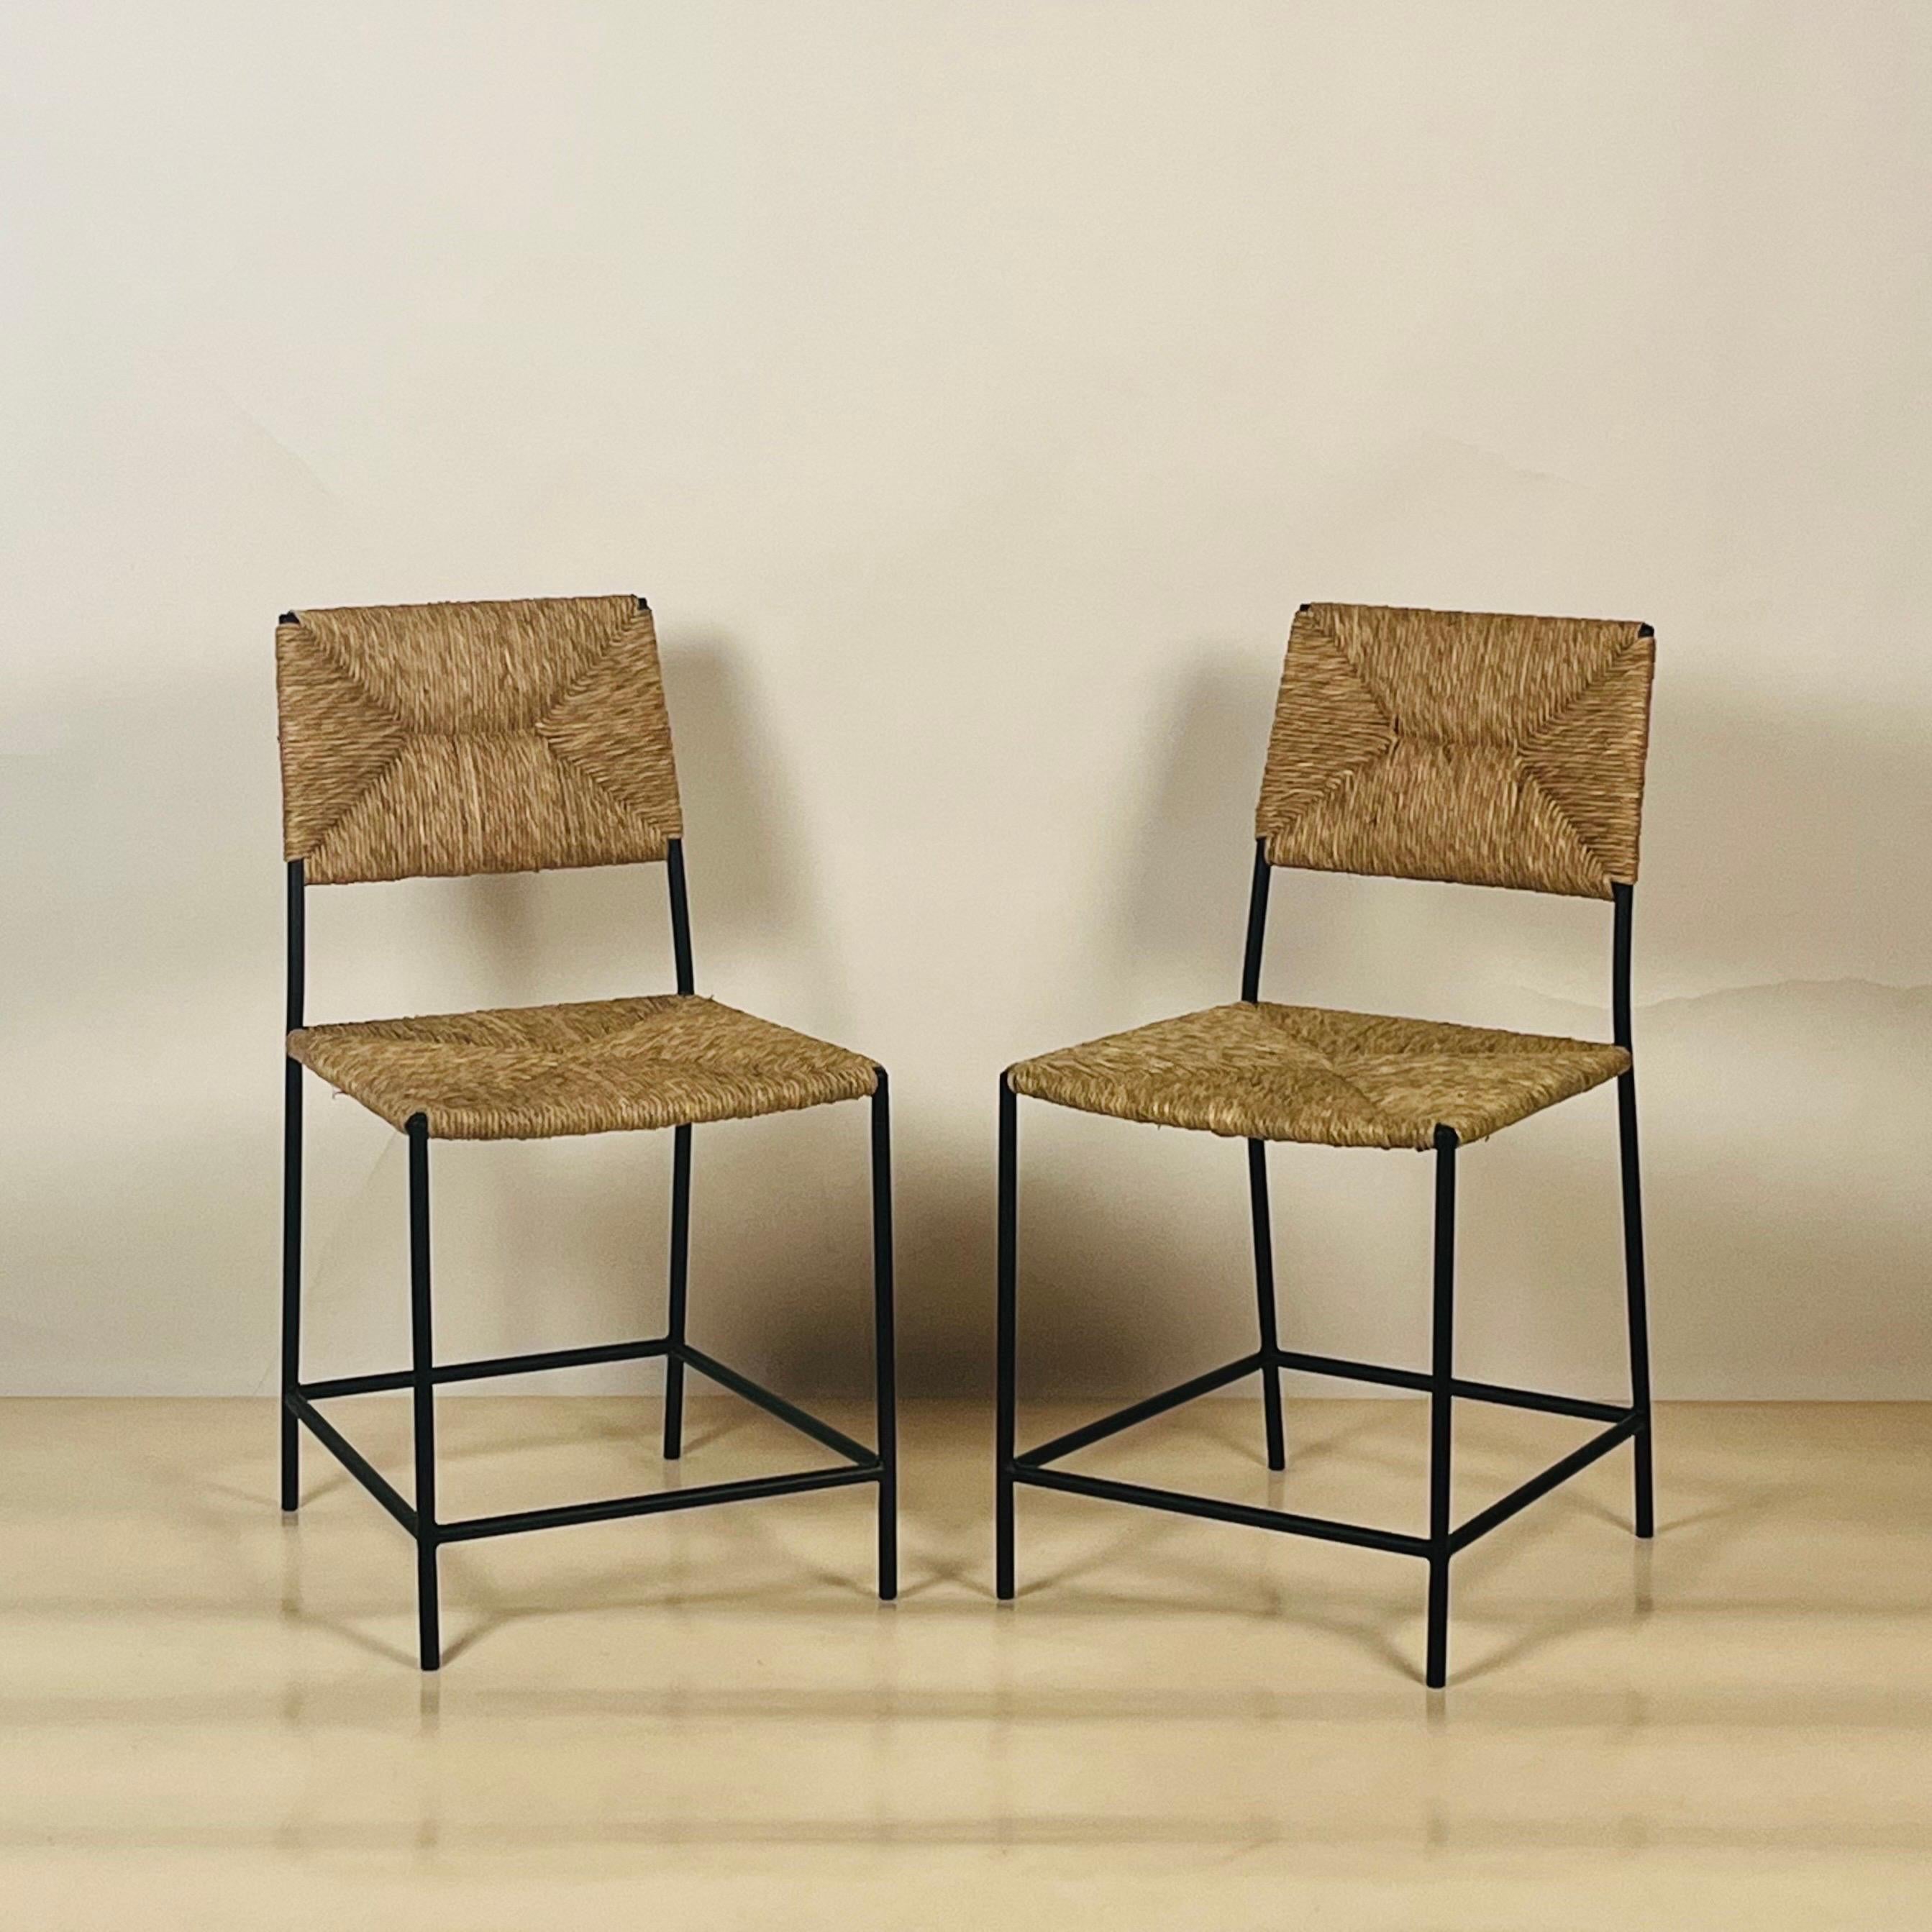 Set of 4 'Campagne' Dining Chairs by Design Frères.

18 1/2 seat height. Discrete non-scratch gliders on the tips of the legs (picture before last).

Sturdy and comfortable. Chic and understated.